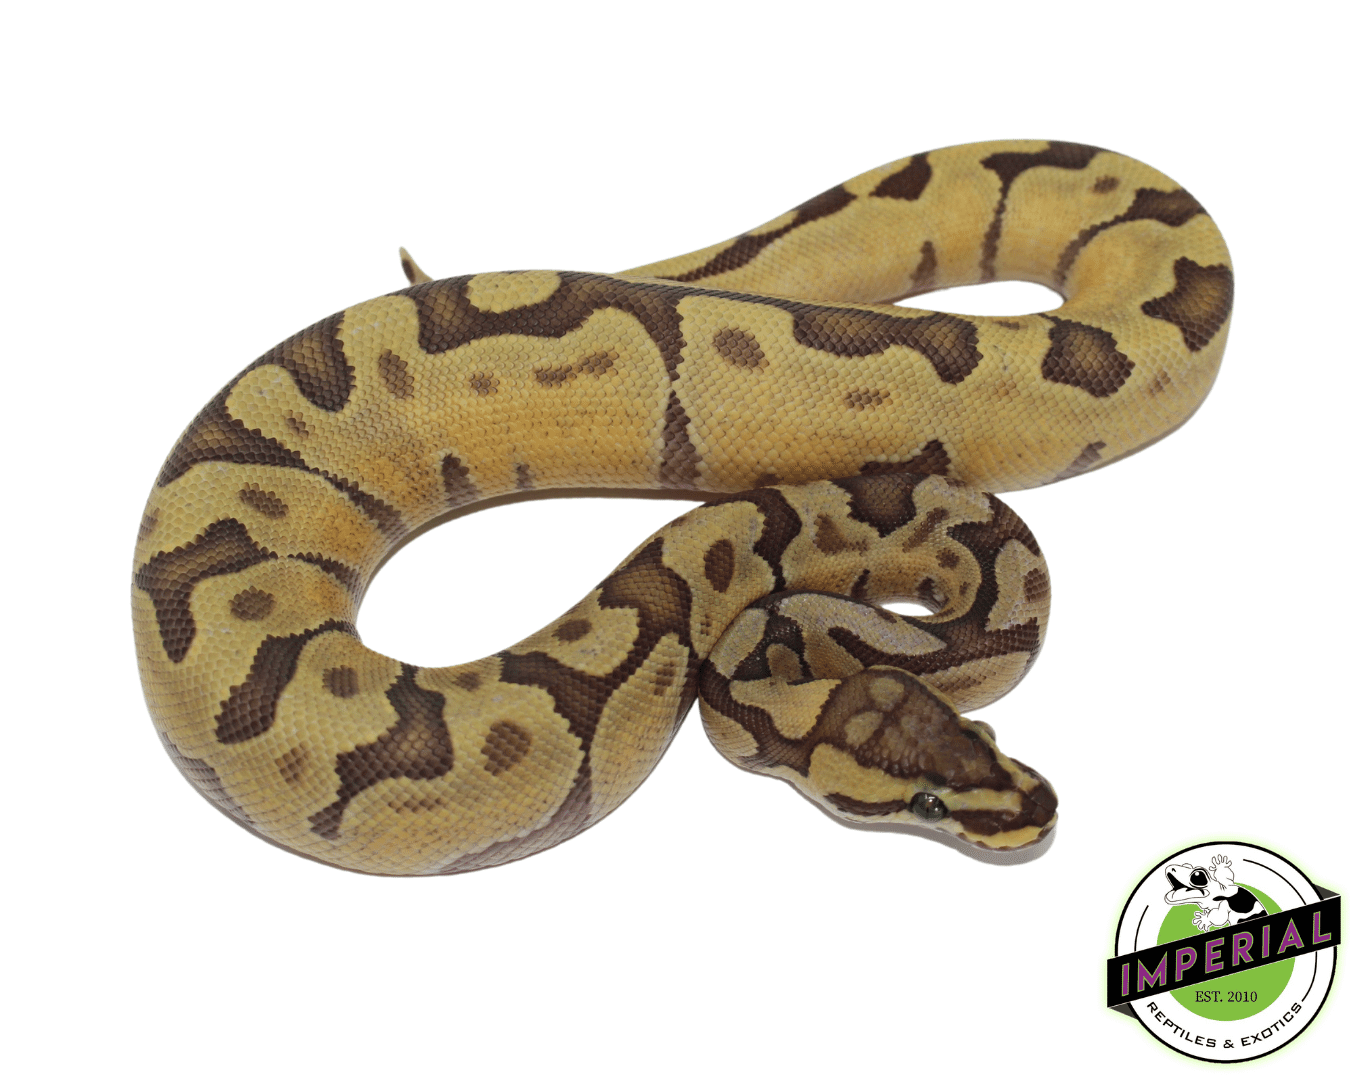 enchi ghost ball python for sale, buy reptiles online